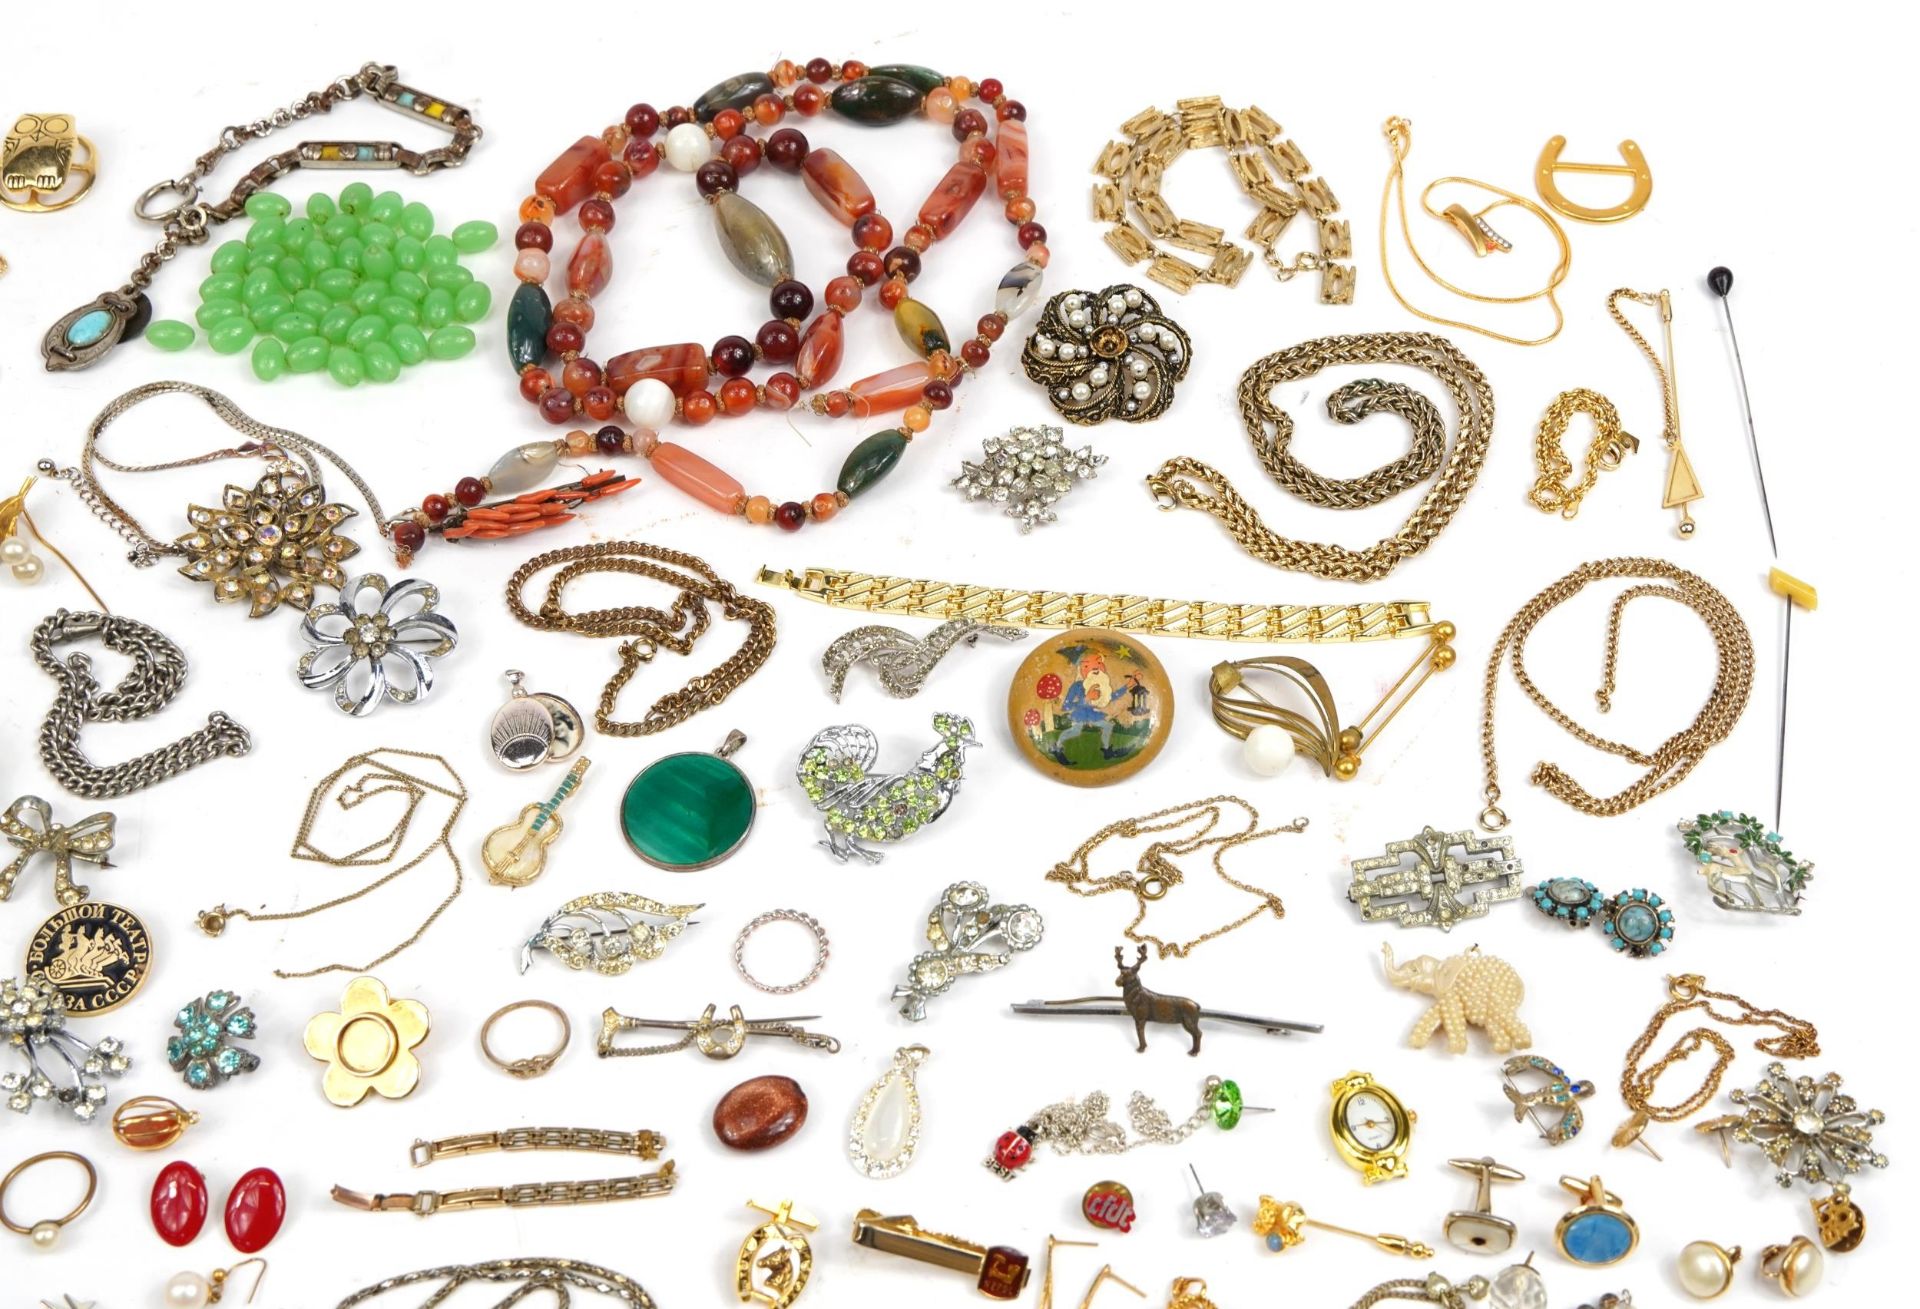 Vintage and later costume jewellery including brooches, necklaces, bracelets and earrings - Bild 3 aus 5